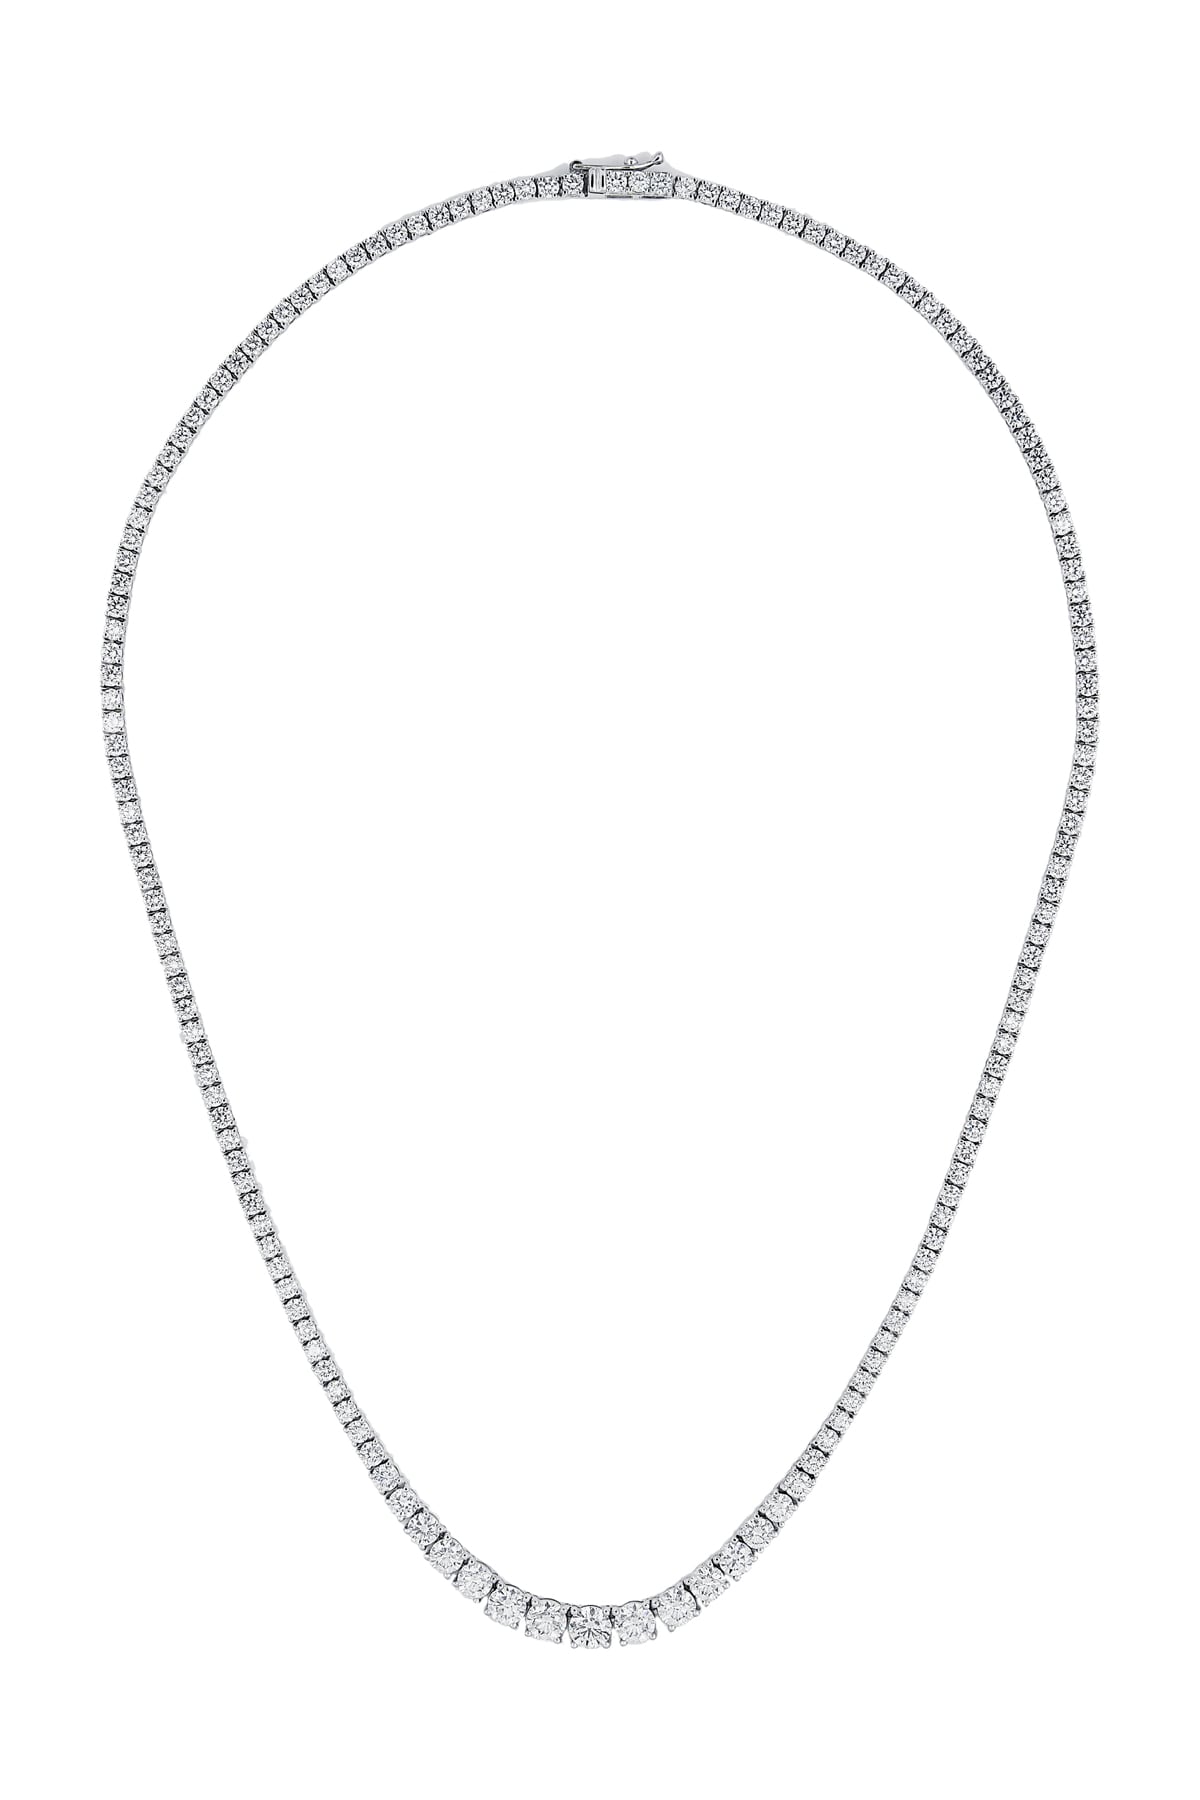 10.25 Carat Graduated Diamond Collier In White Gold from LeGassick Jewellery.